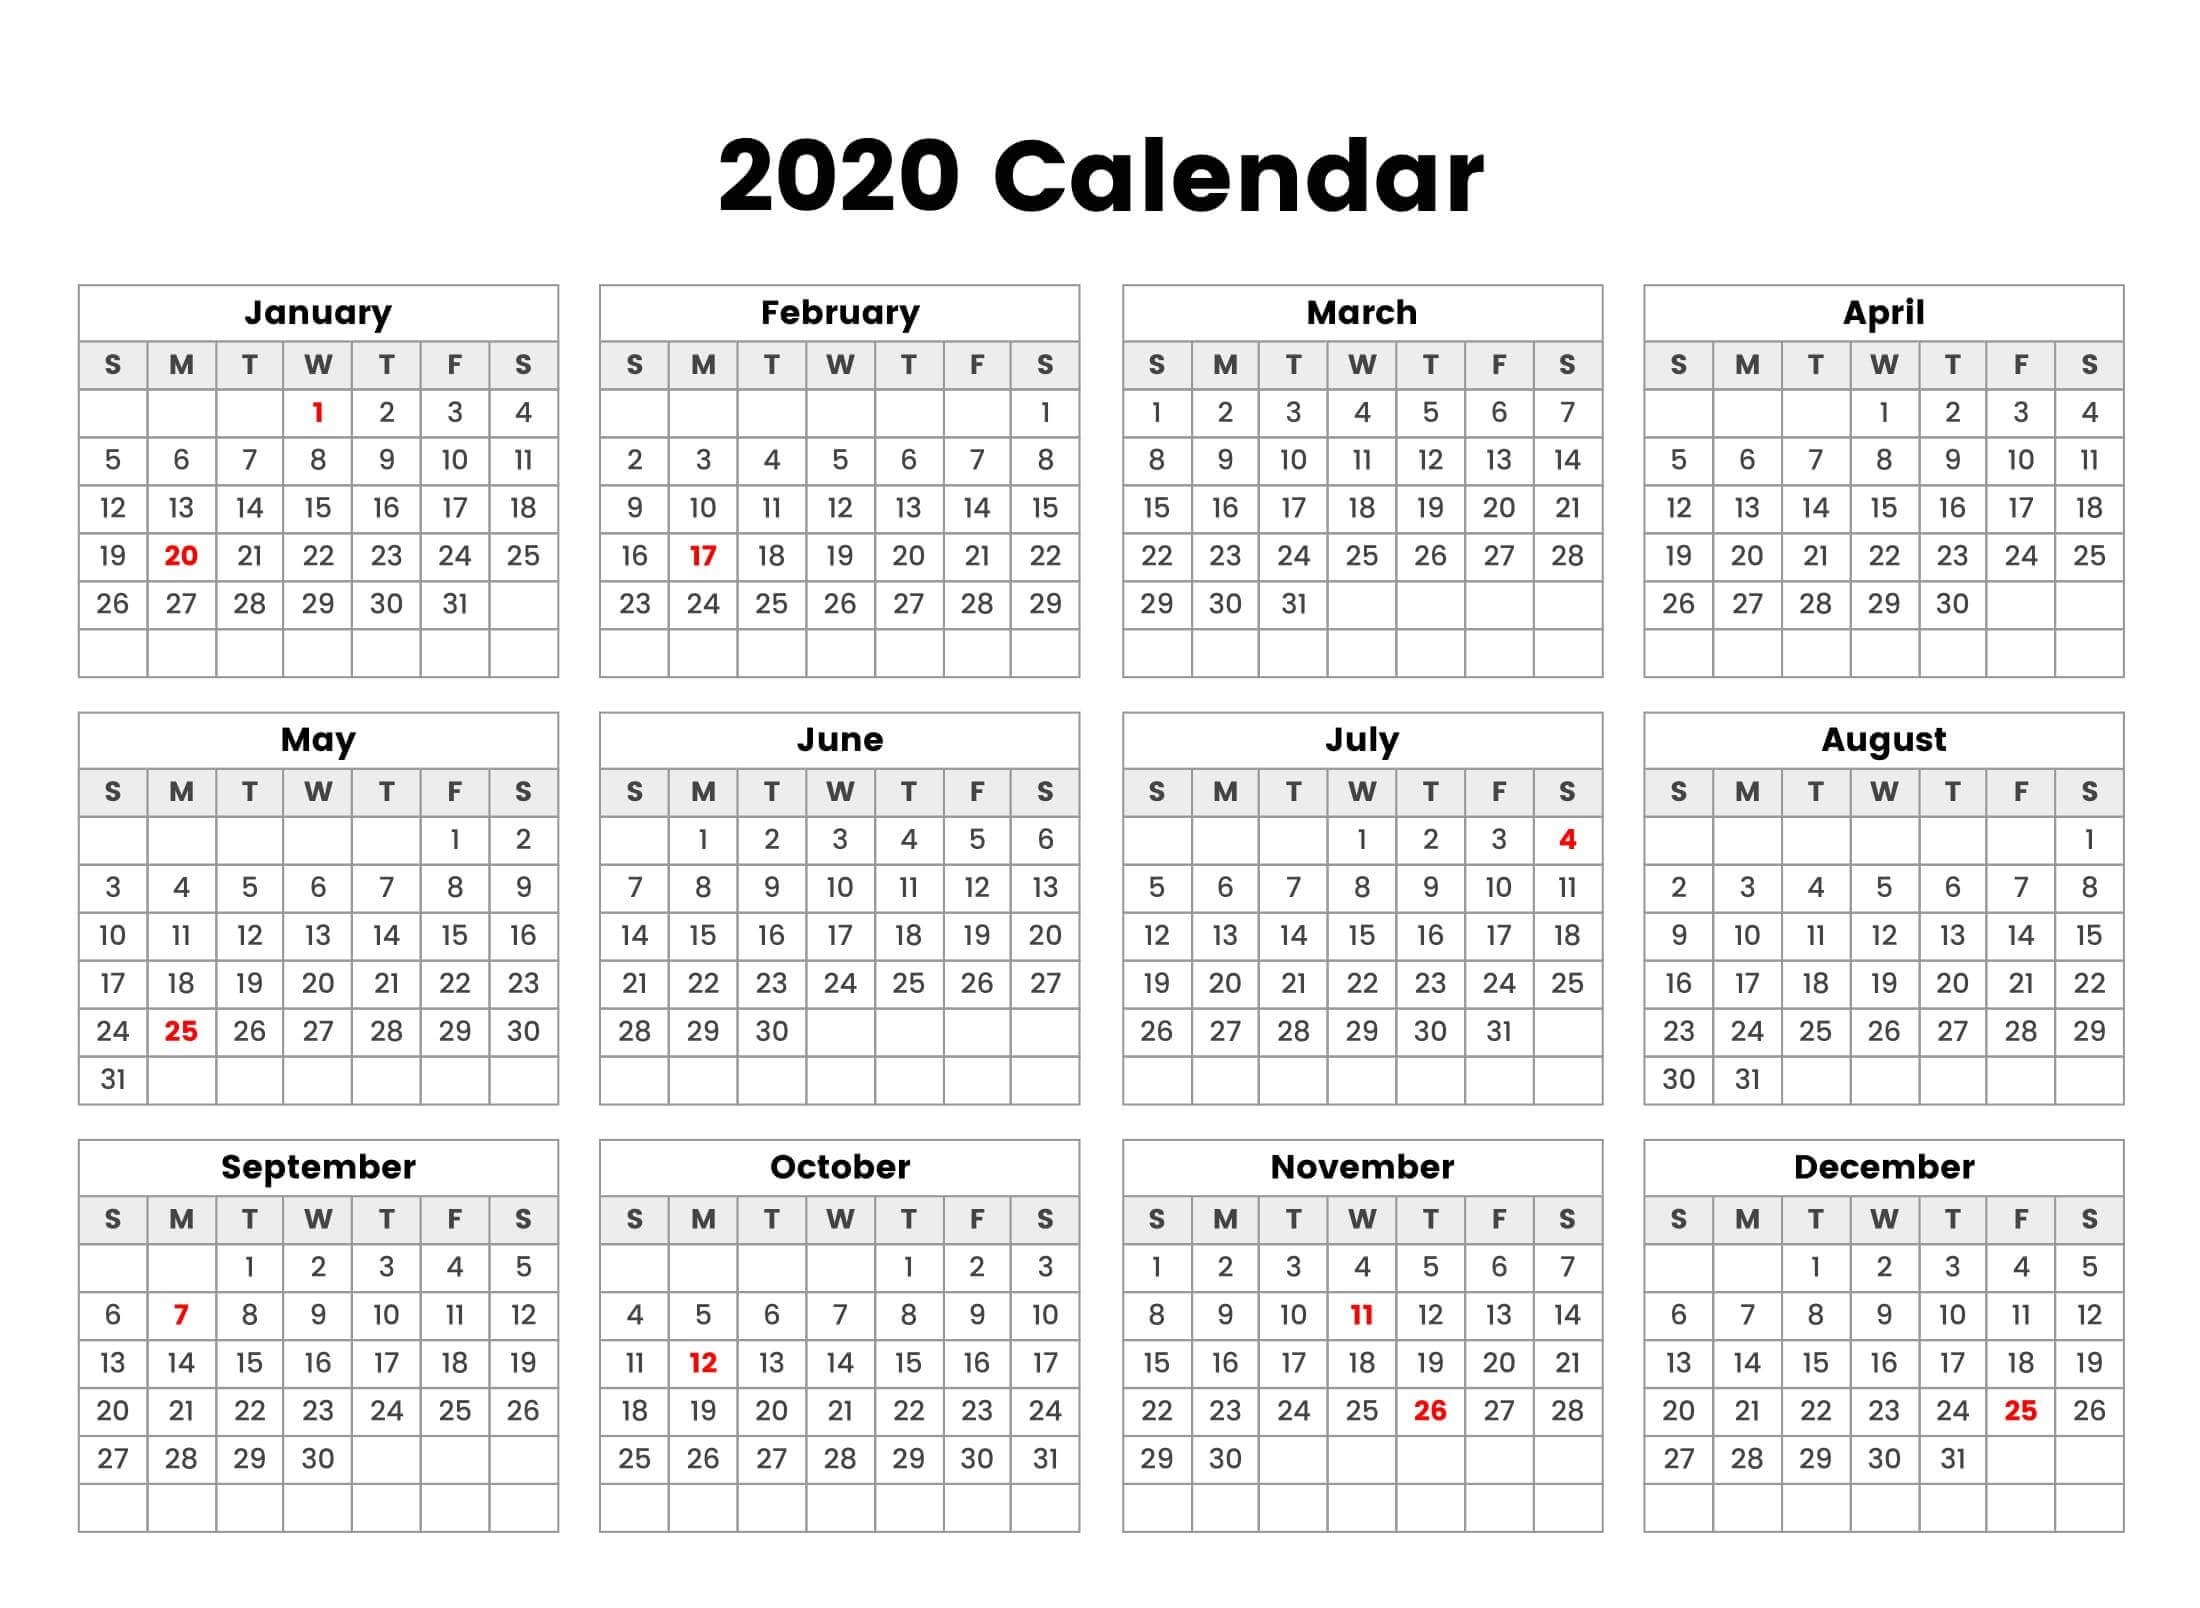 New Year Cute Calendar 2020 Holidays - 2019 Calendars For Calendar For Year 2020 Queensland With All Holidays